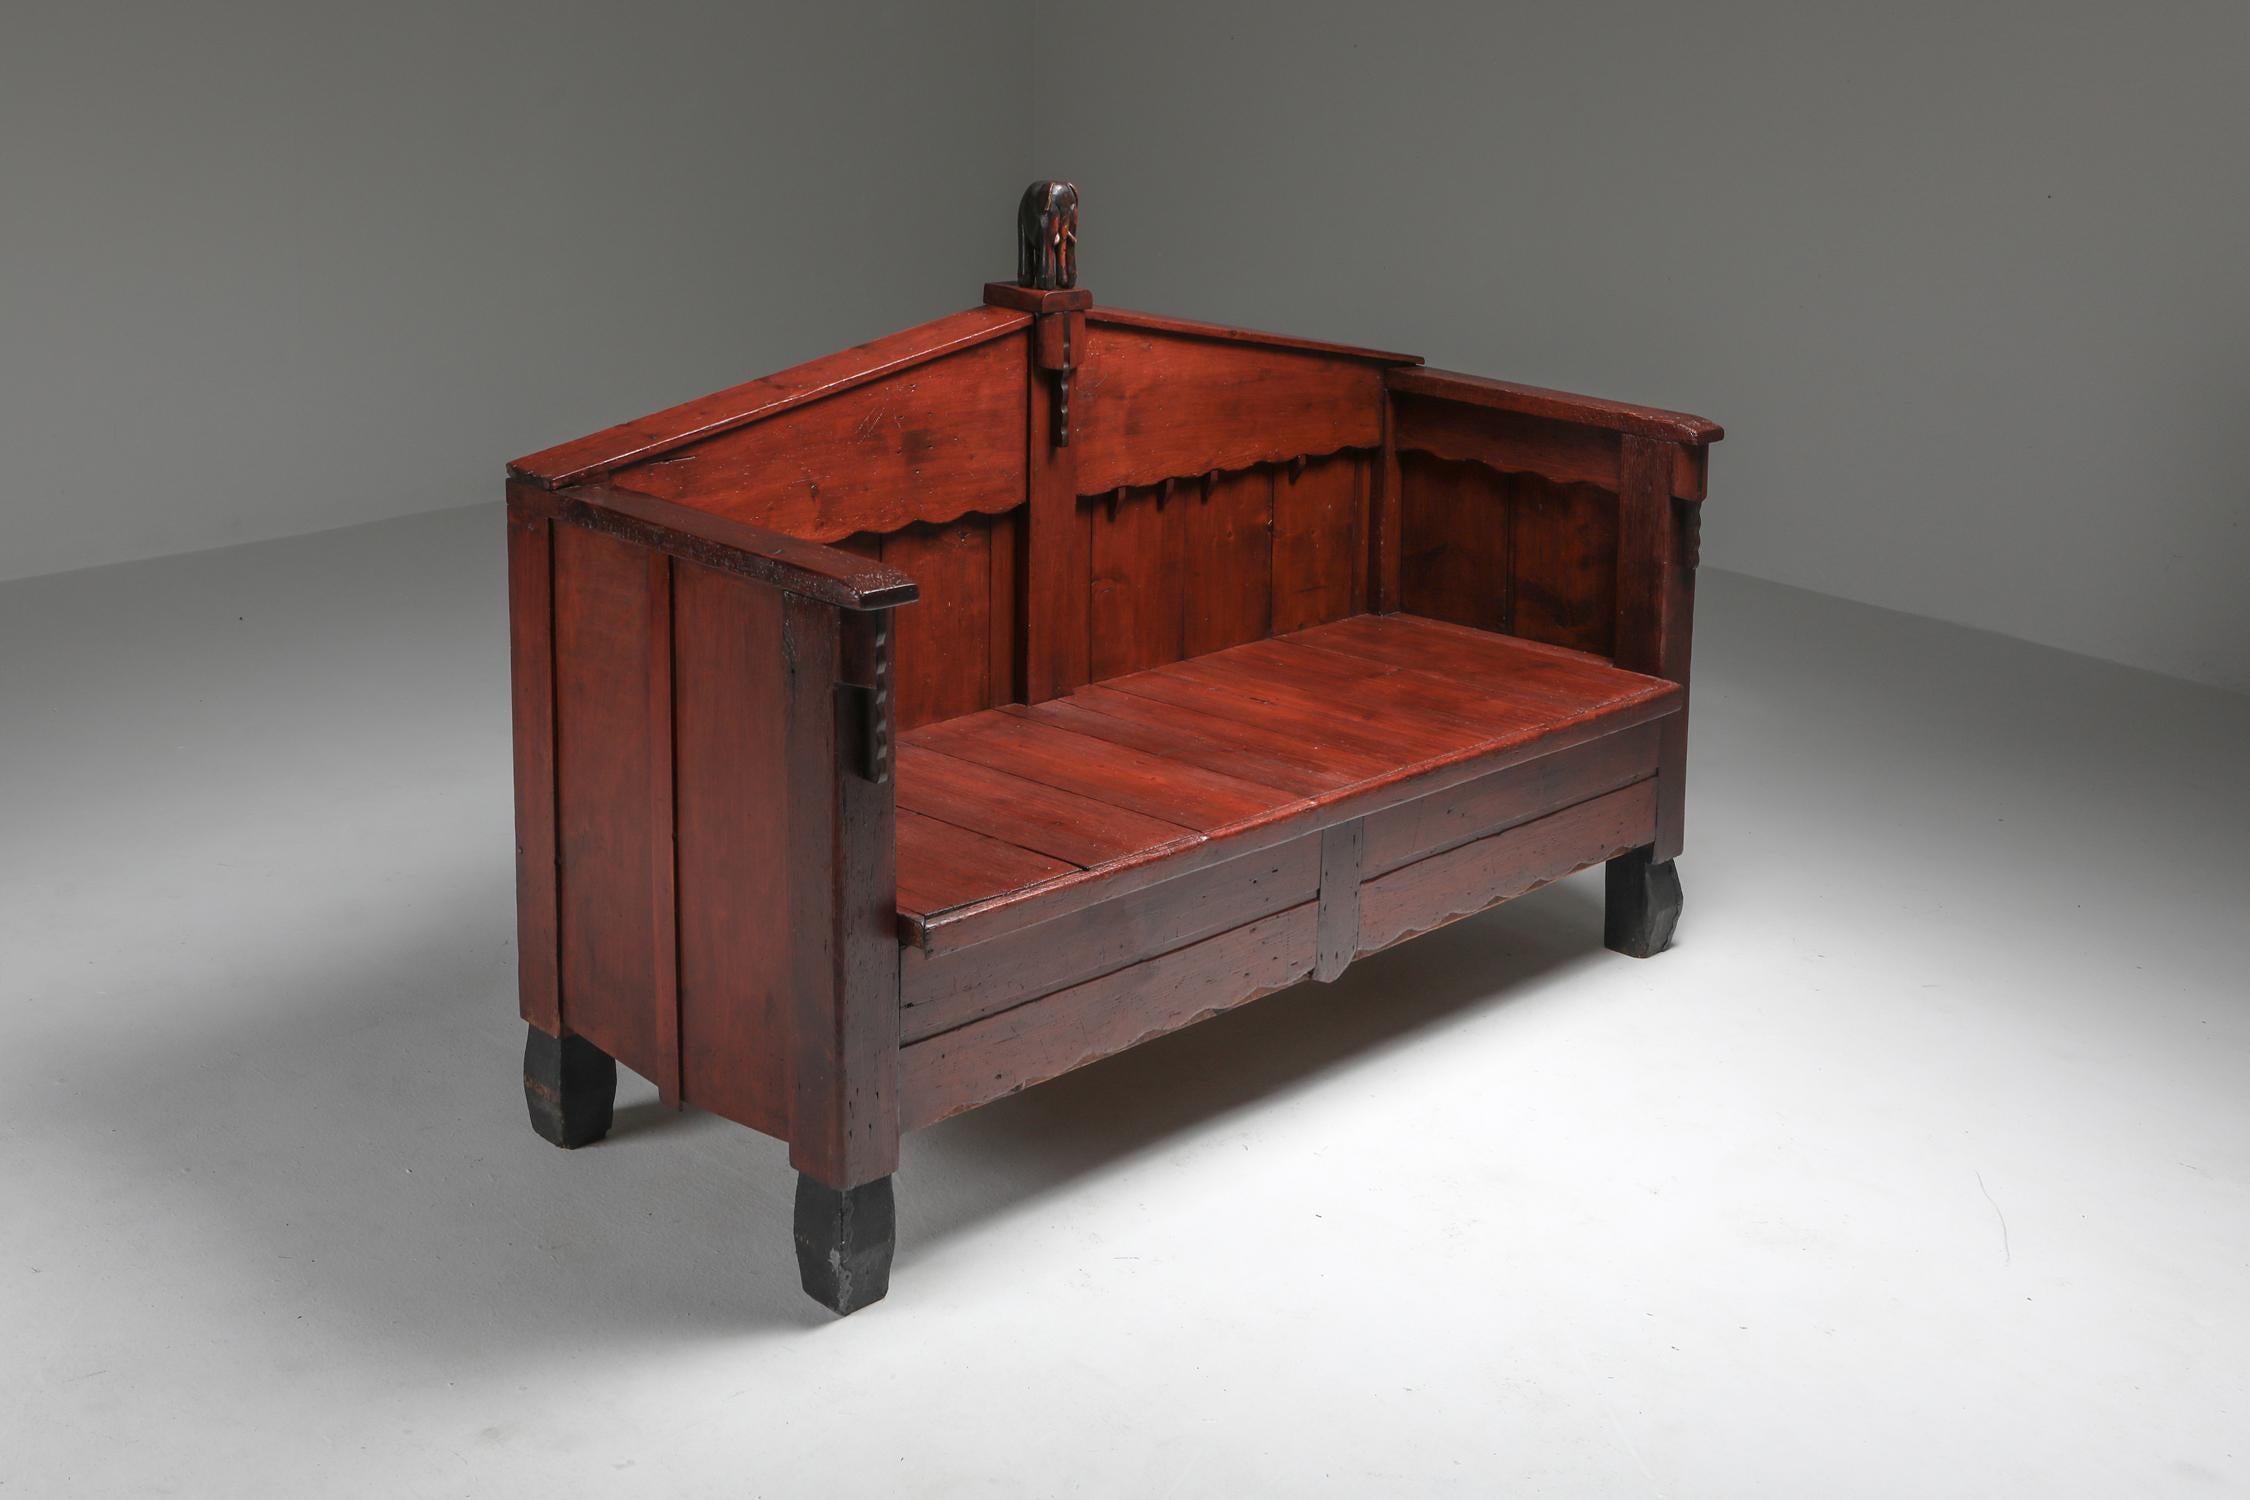 Sculptural Amsterdam School bench, Netherlands, 1920s


This almost antique seating piece is a rare survivor of its era.
What I love about this piece is that it's not made from imported colonial exotic woods, but locally sourced pine wood. In the